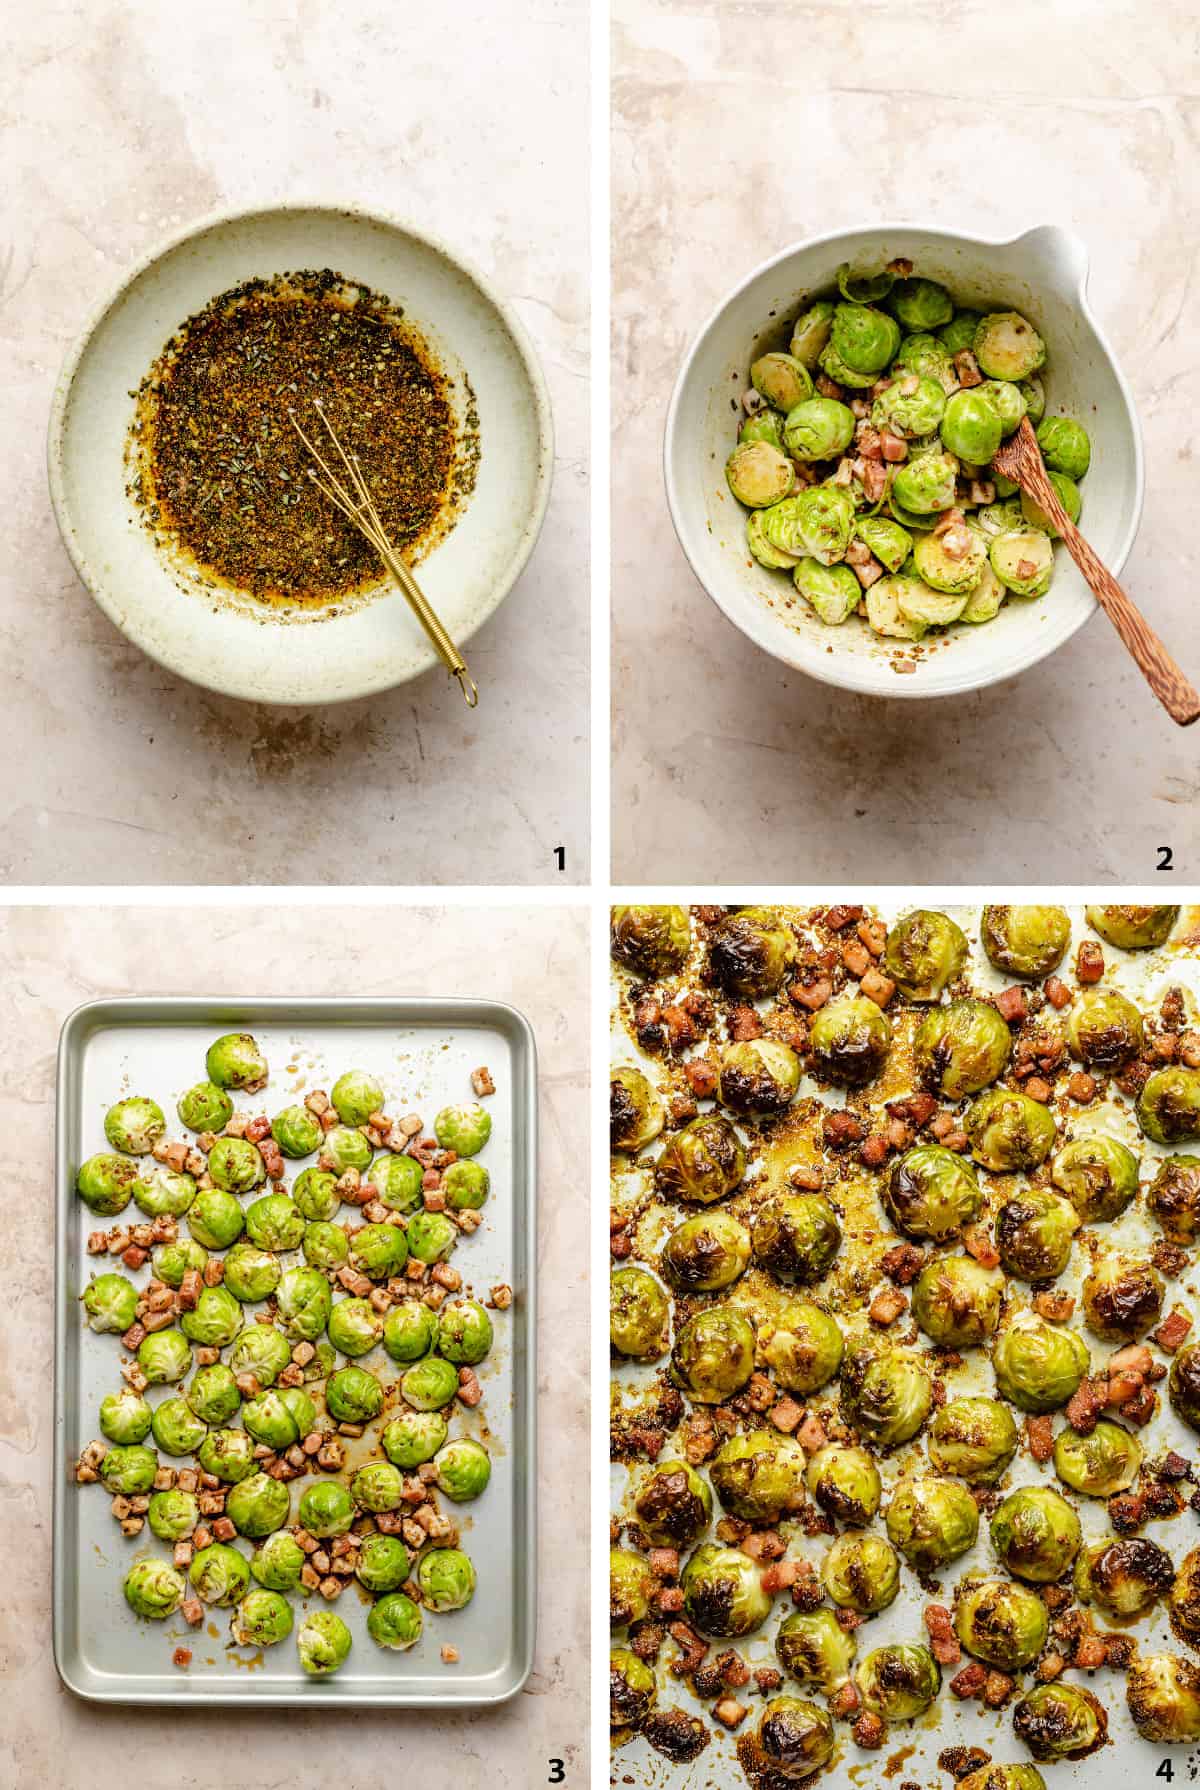 Process steps of making the marinade, tossing in the brussels sprouts, pre baked and baked on a baking sheet. 